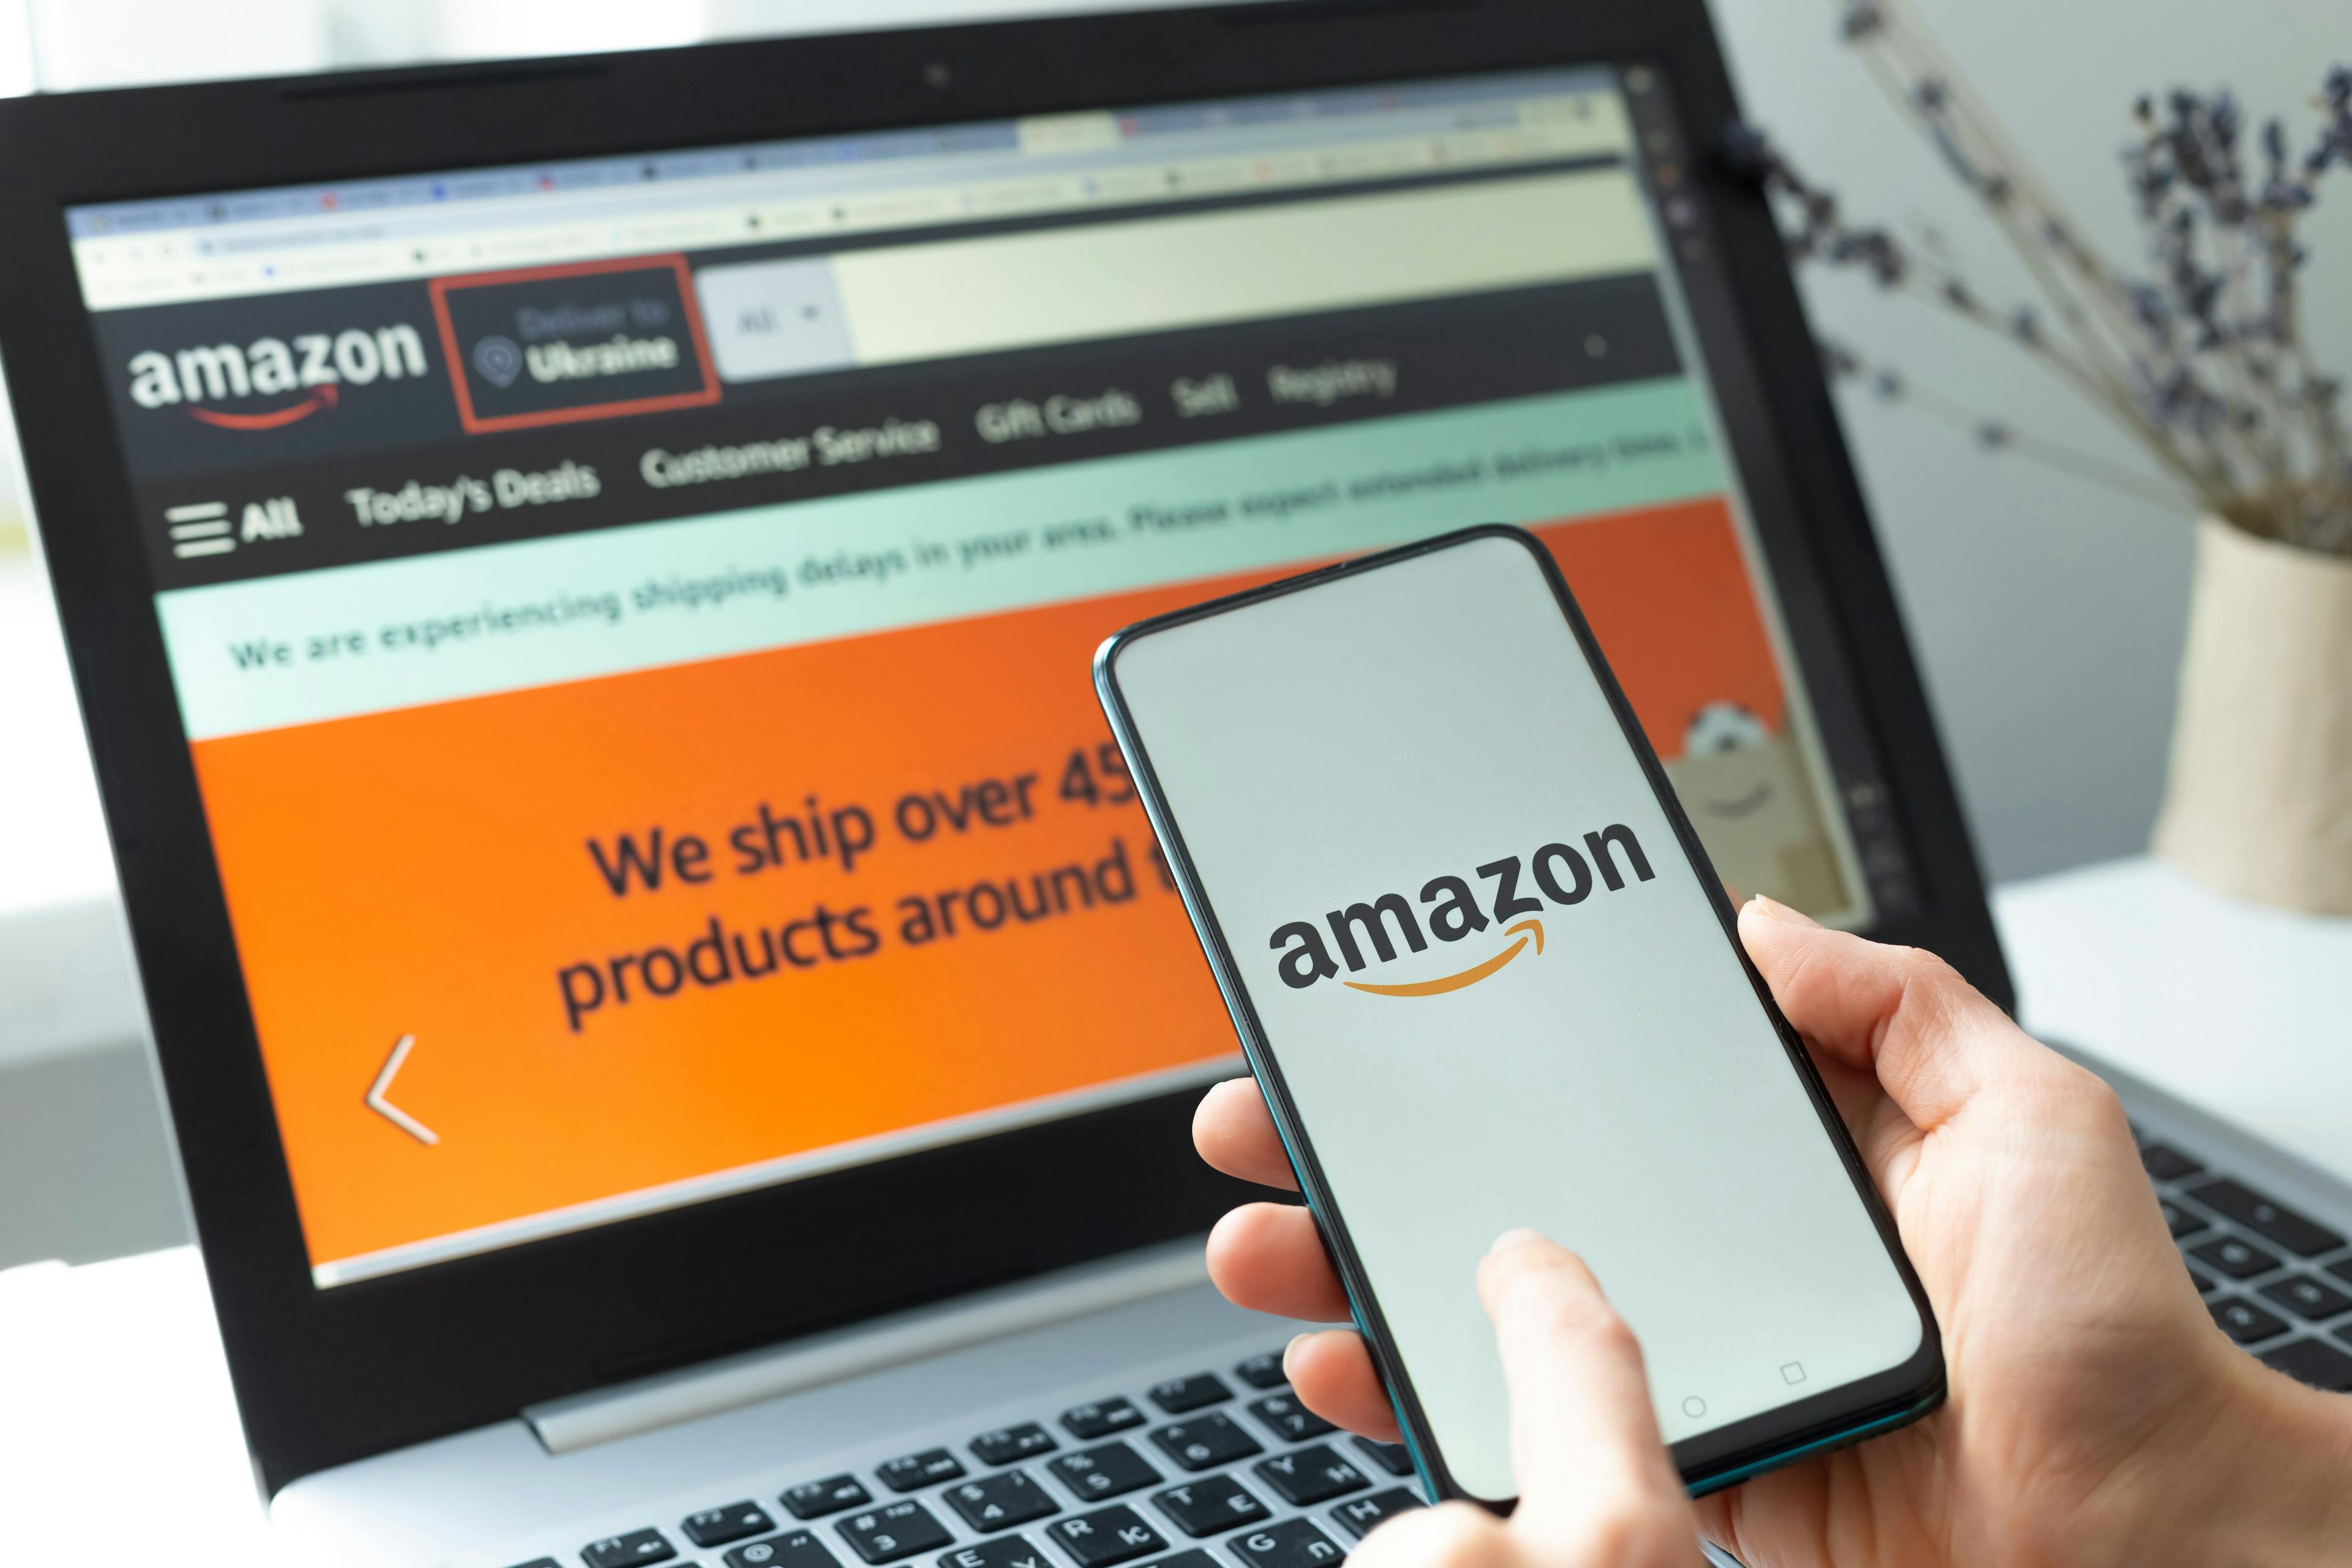 Amazon laying off workers in medical divisions: ©Oleksandr - stock.adobe.com